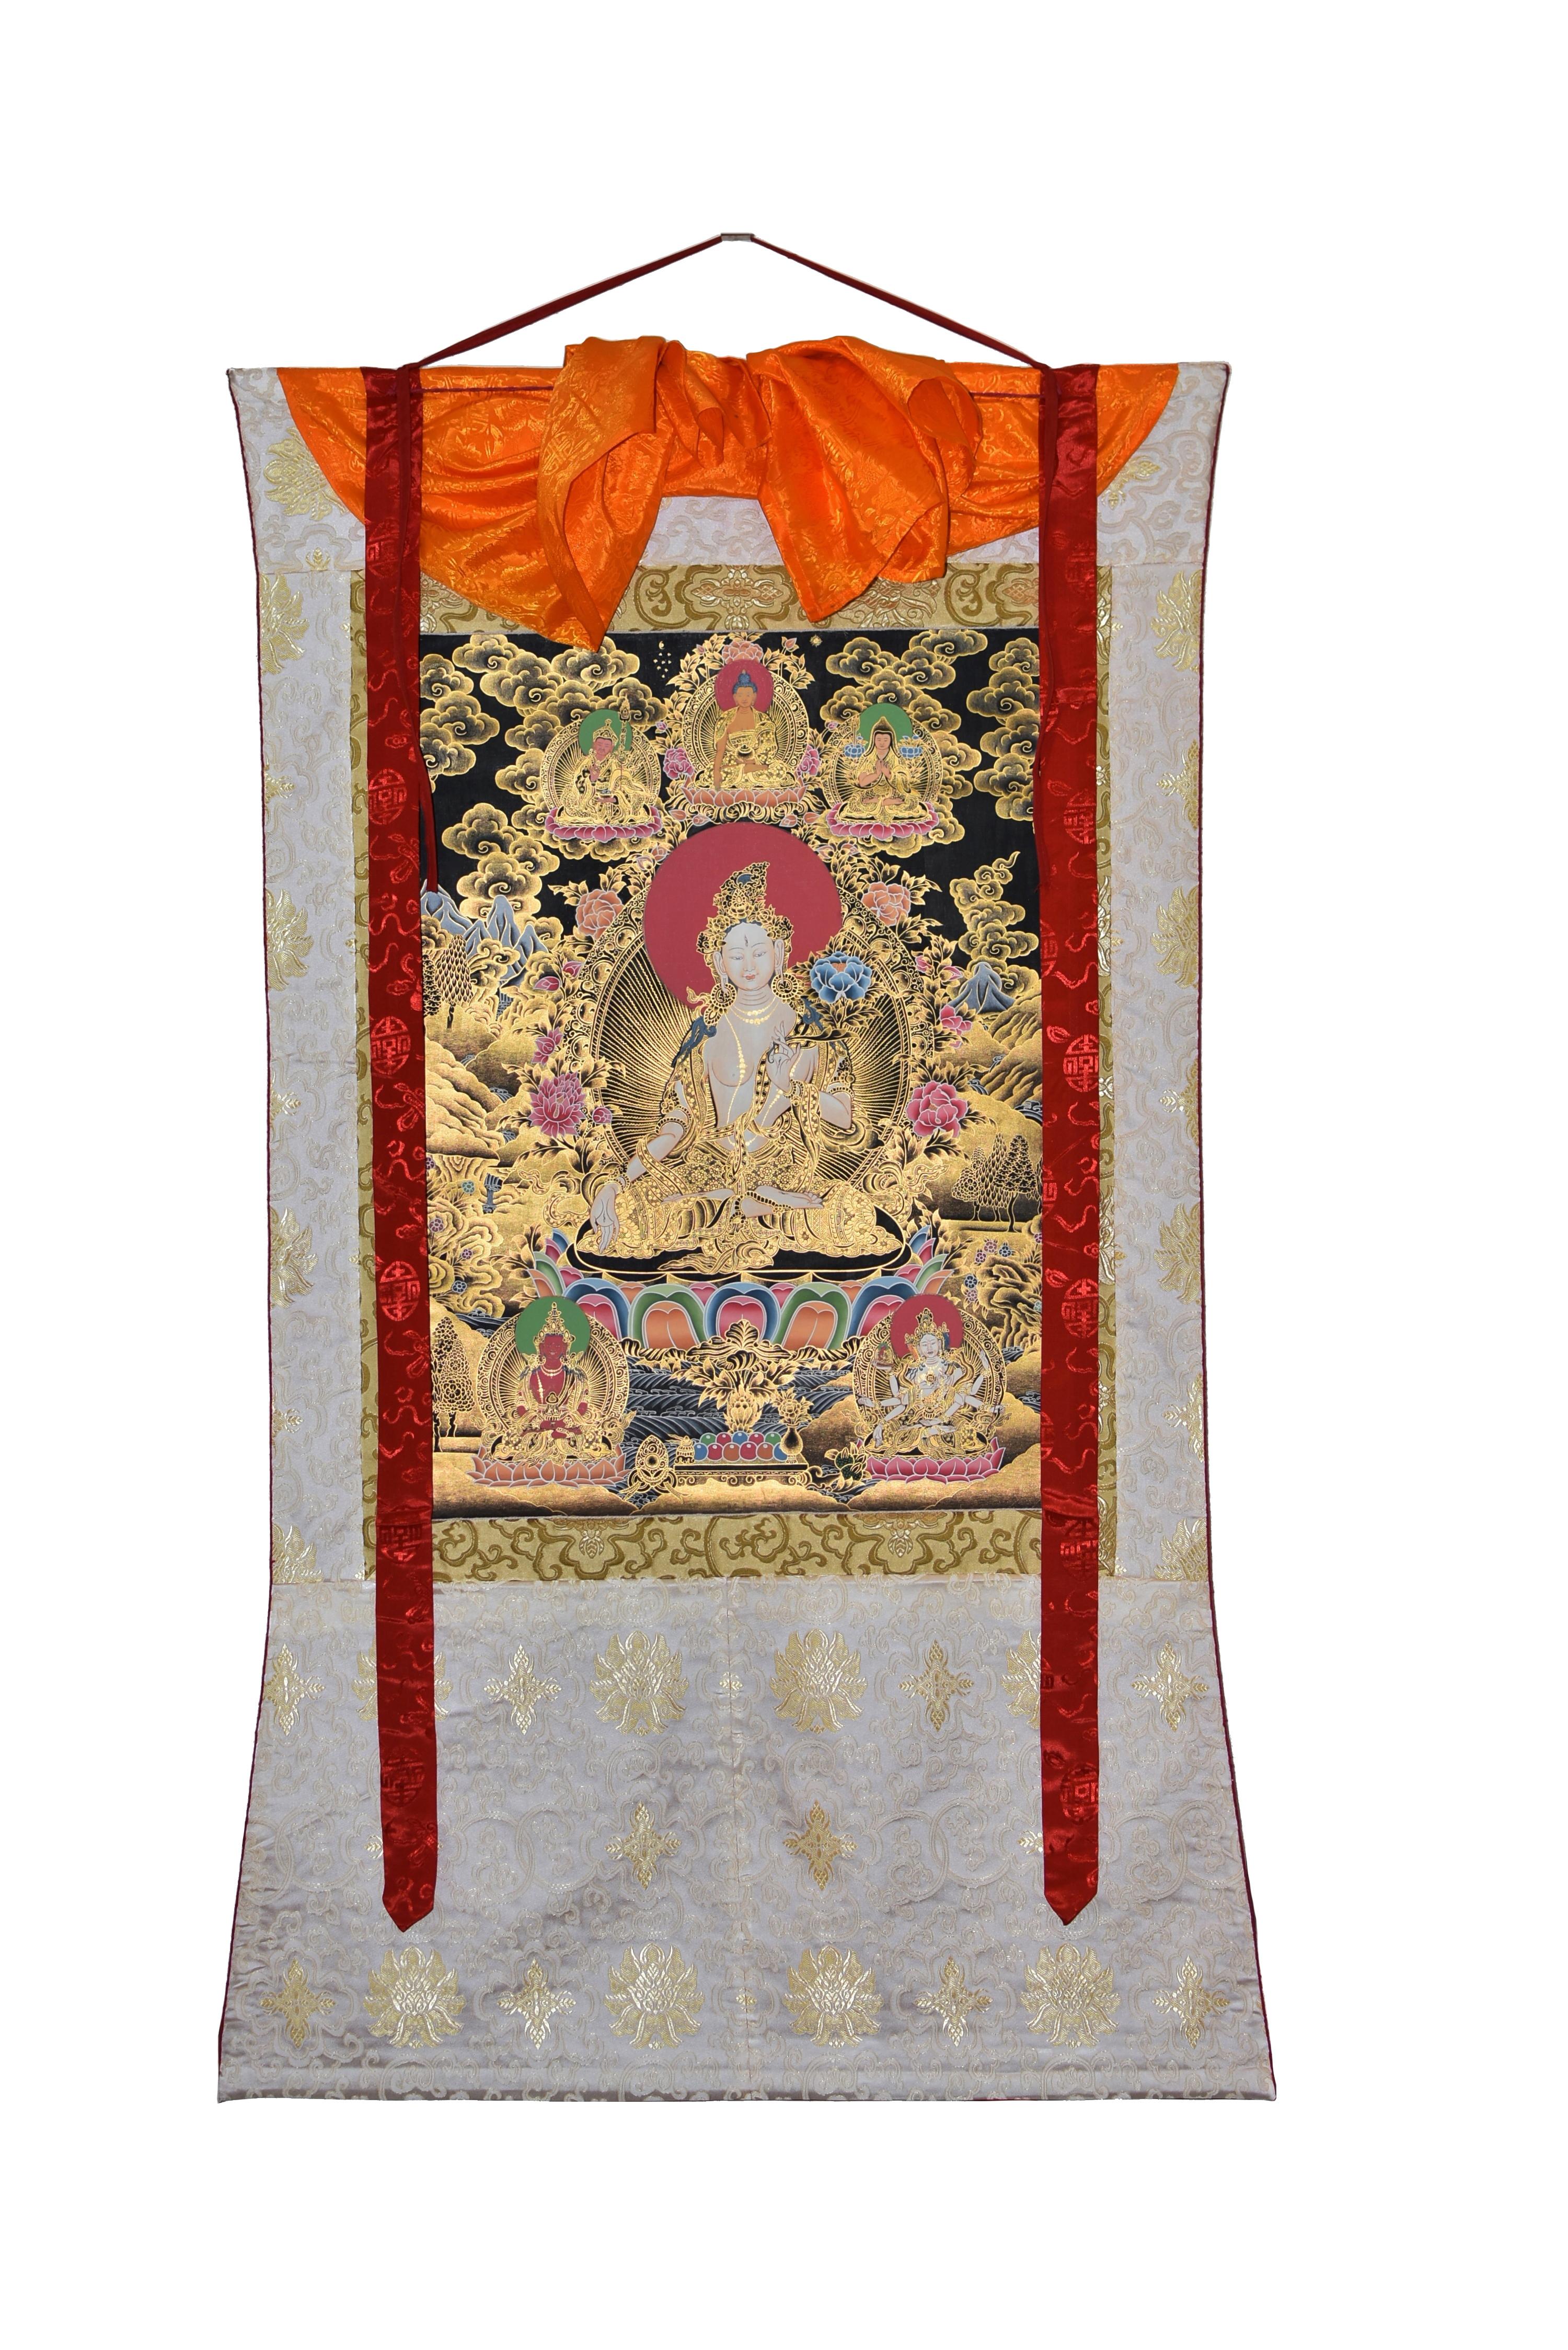 An exquisitely hand painted Tibetan Thangka by one of our master artists in Nepal featuring the majestic White Tara. Seated Dhyana Asana upon a lotus throne, her ethereal presence is accentuated by her serene countenance and youthful visage, with